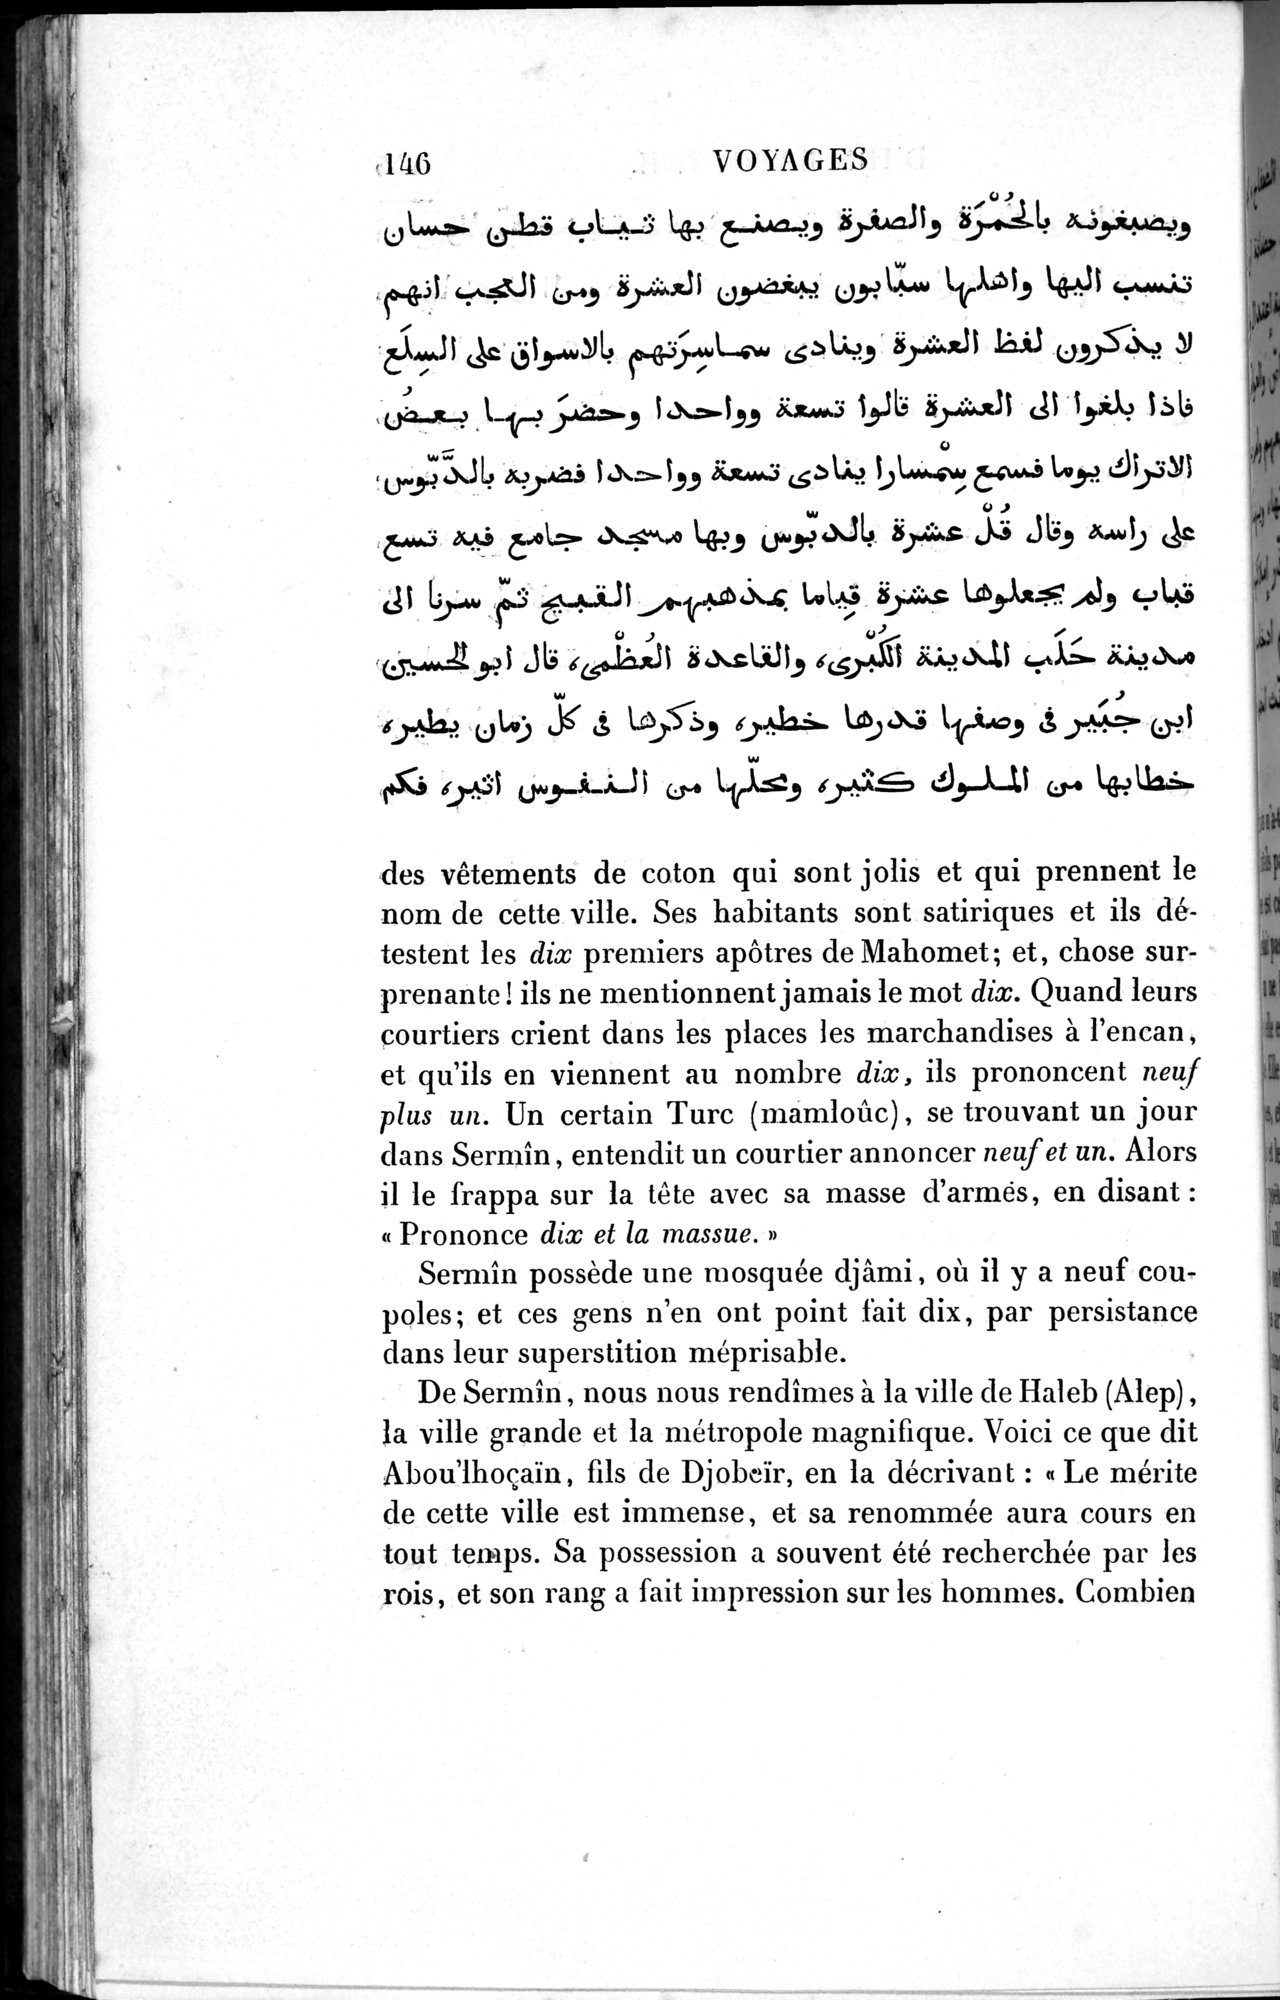 Voyages d'Ibn Batoutah : vol.1 / Page 206 (Grayscale High Resolution Image)